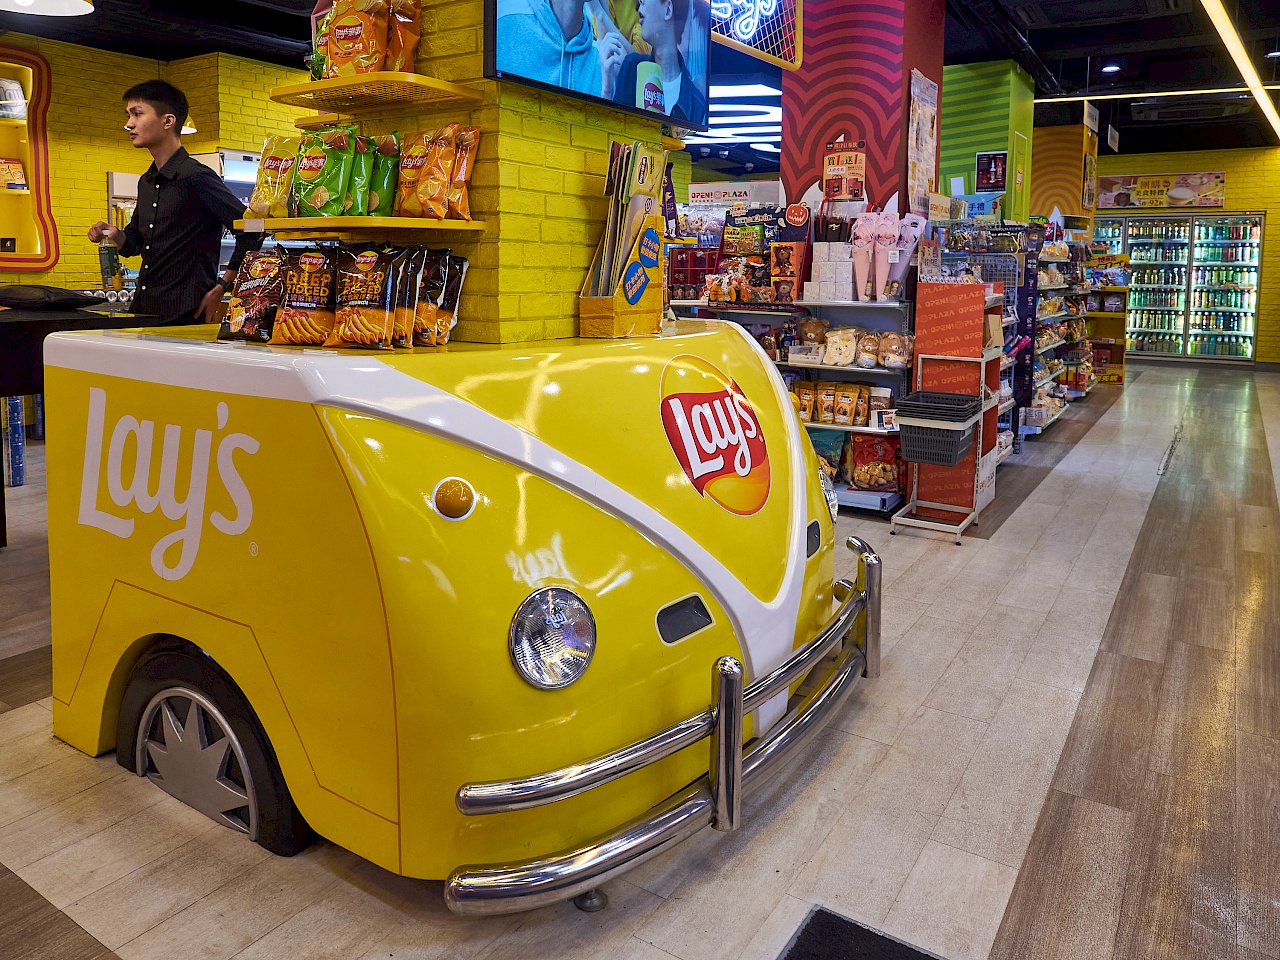 Lay's 7-Eleven in Taipeh